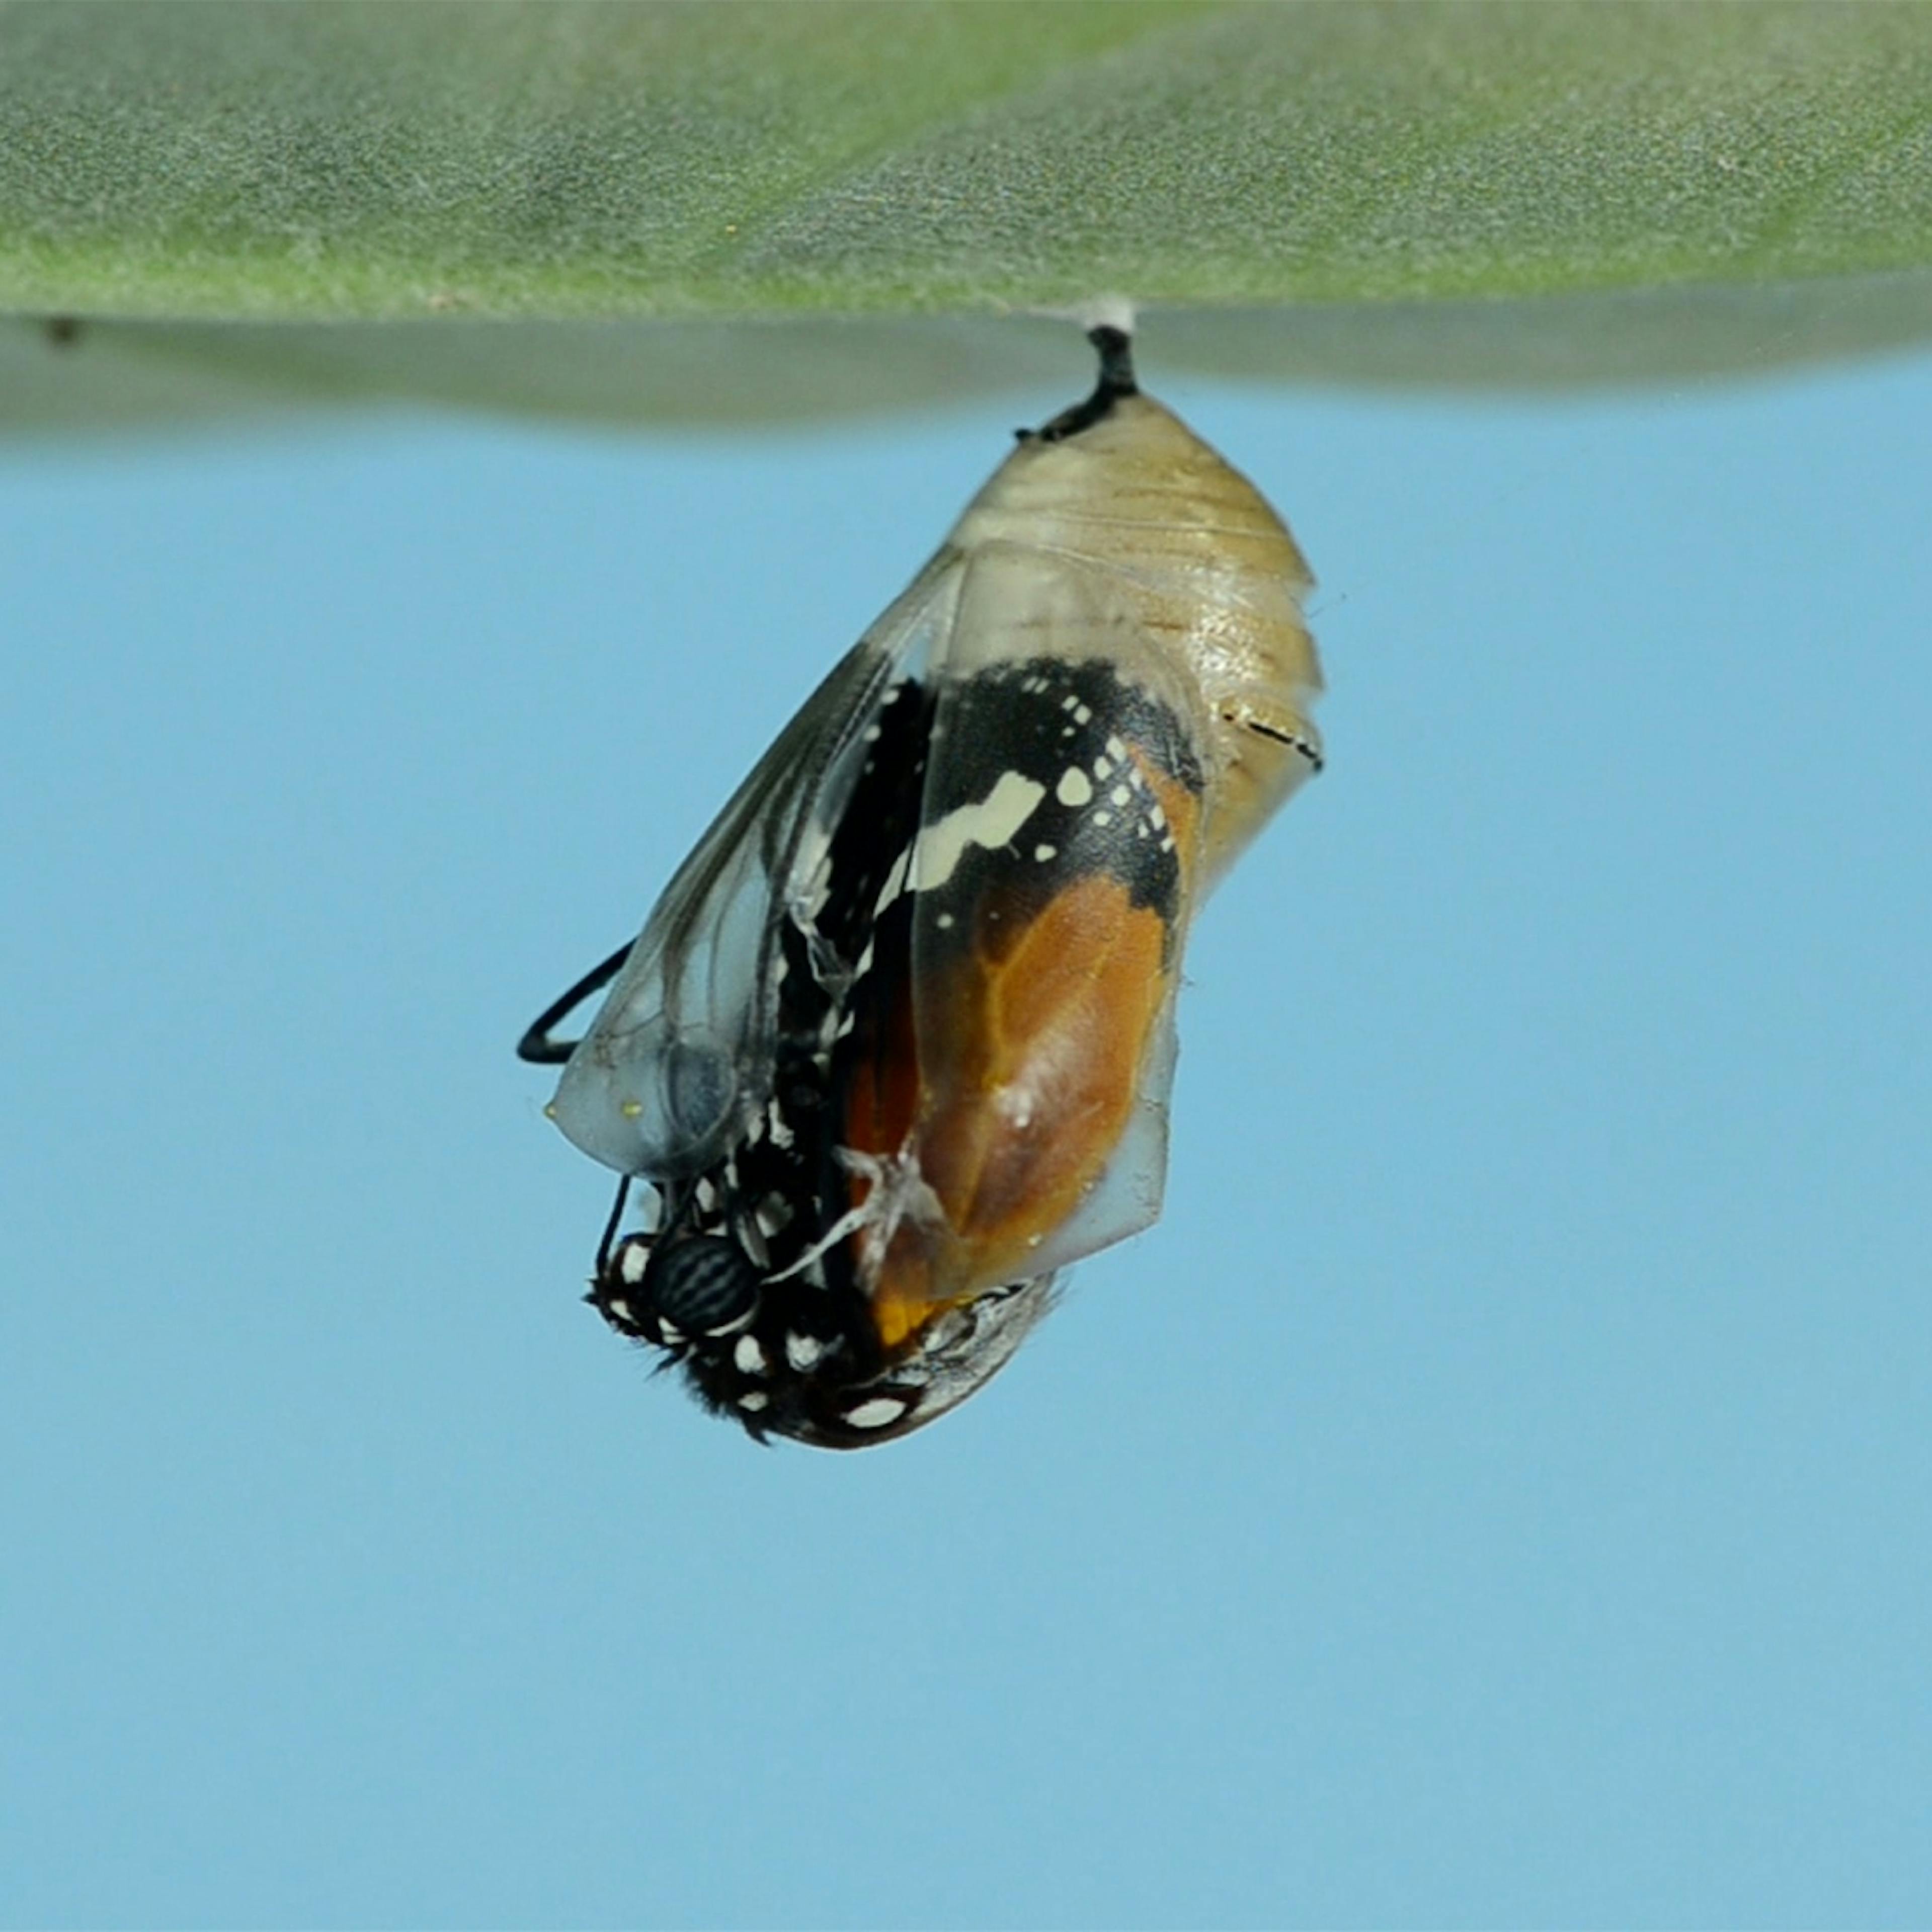 The pupa stage, hanging under a milkweed leaf for about 8–15 days, before fully emerging into butterflies.